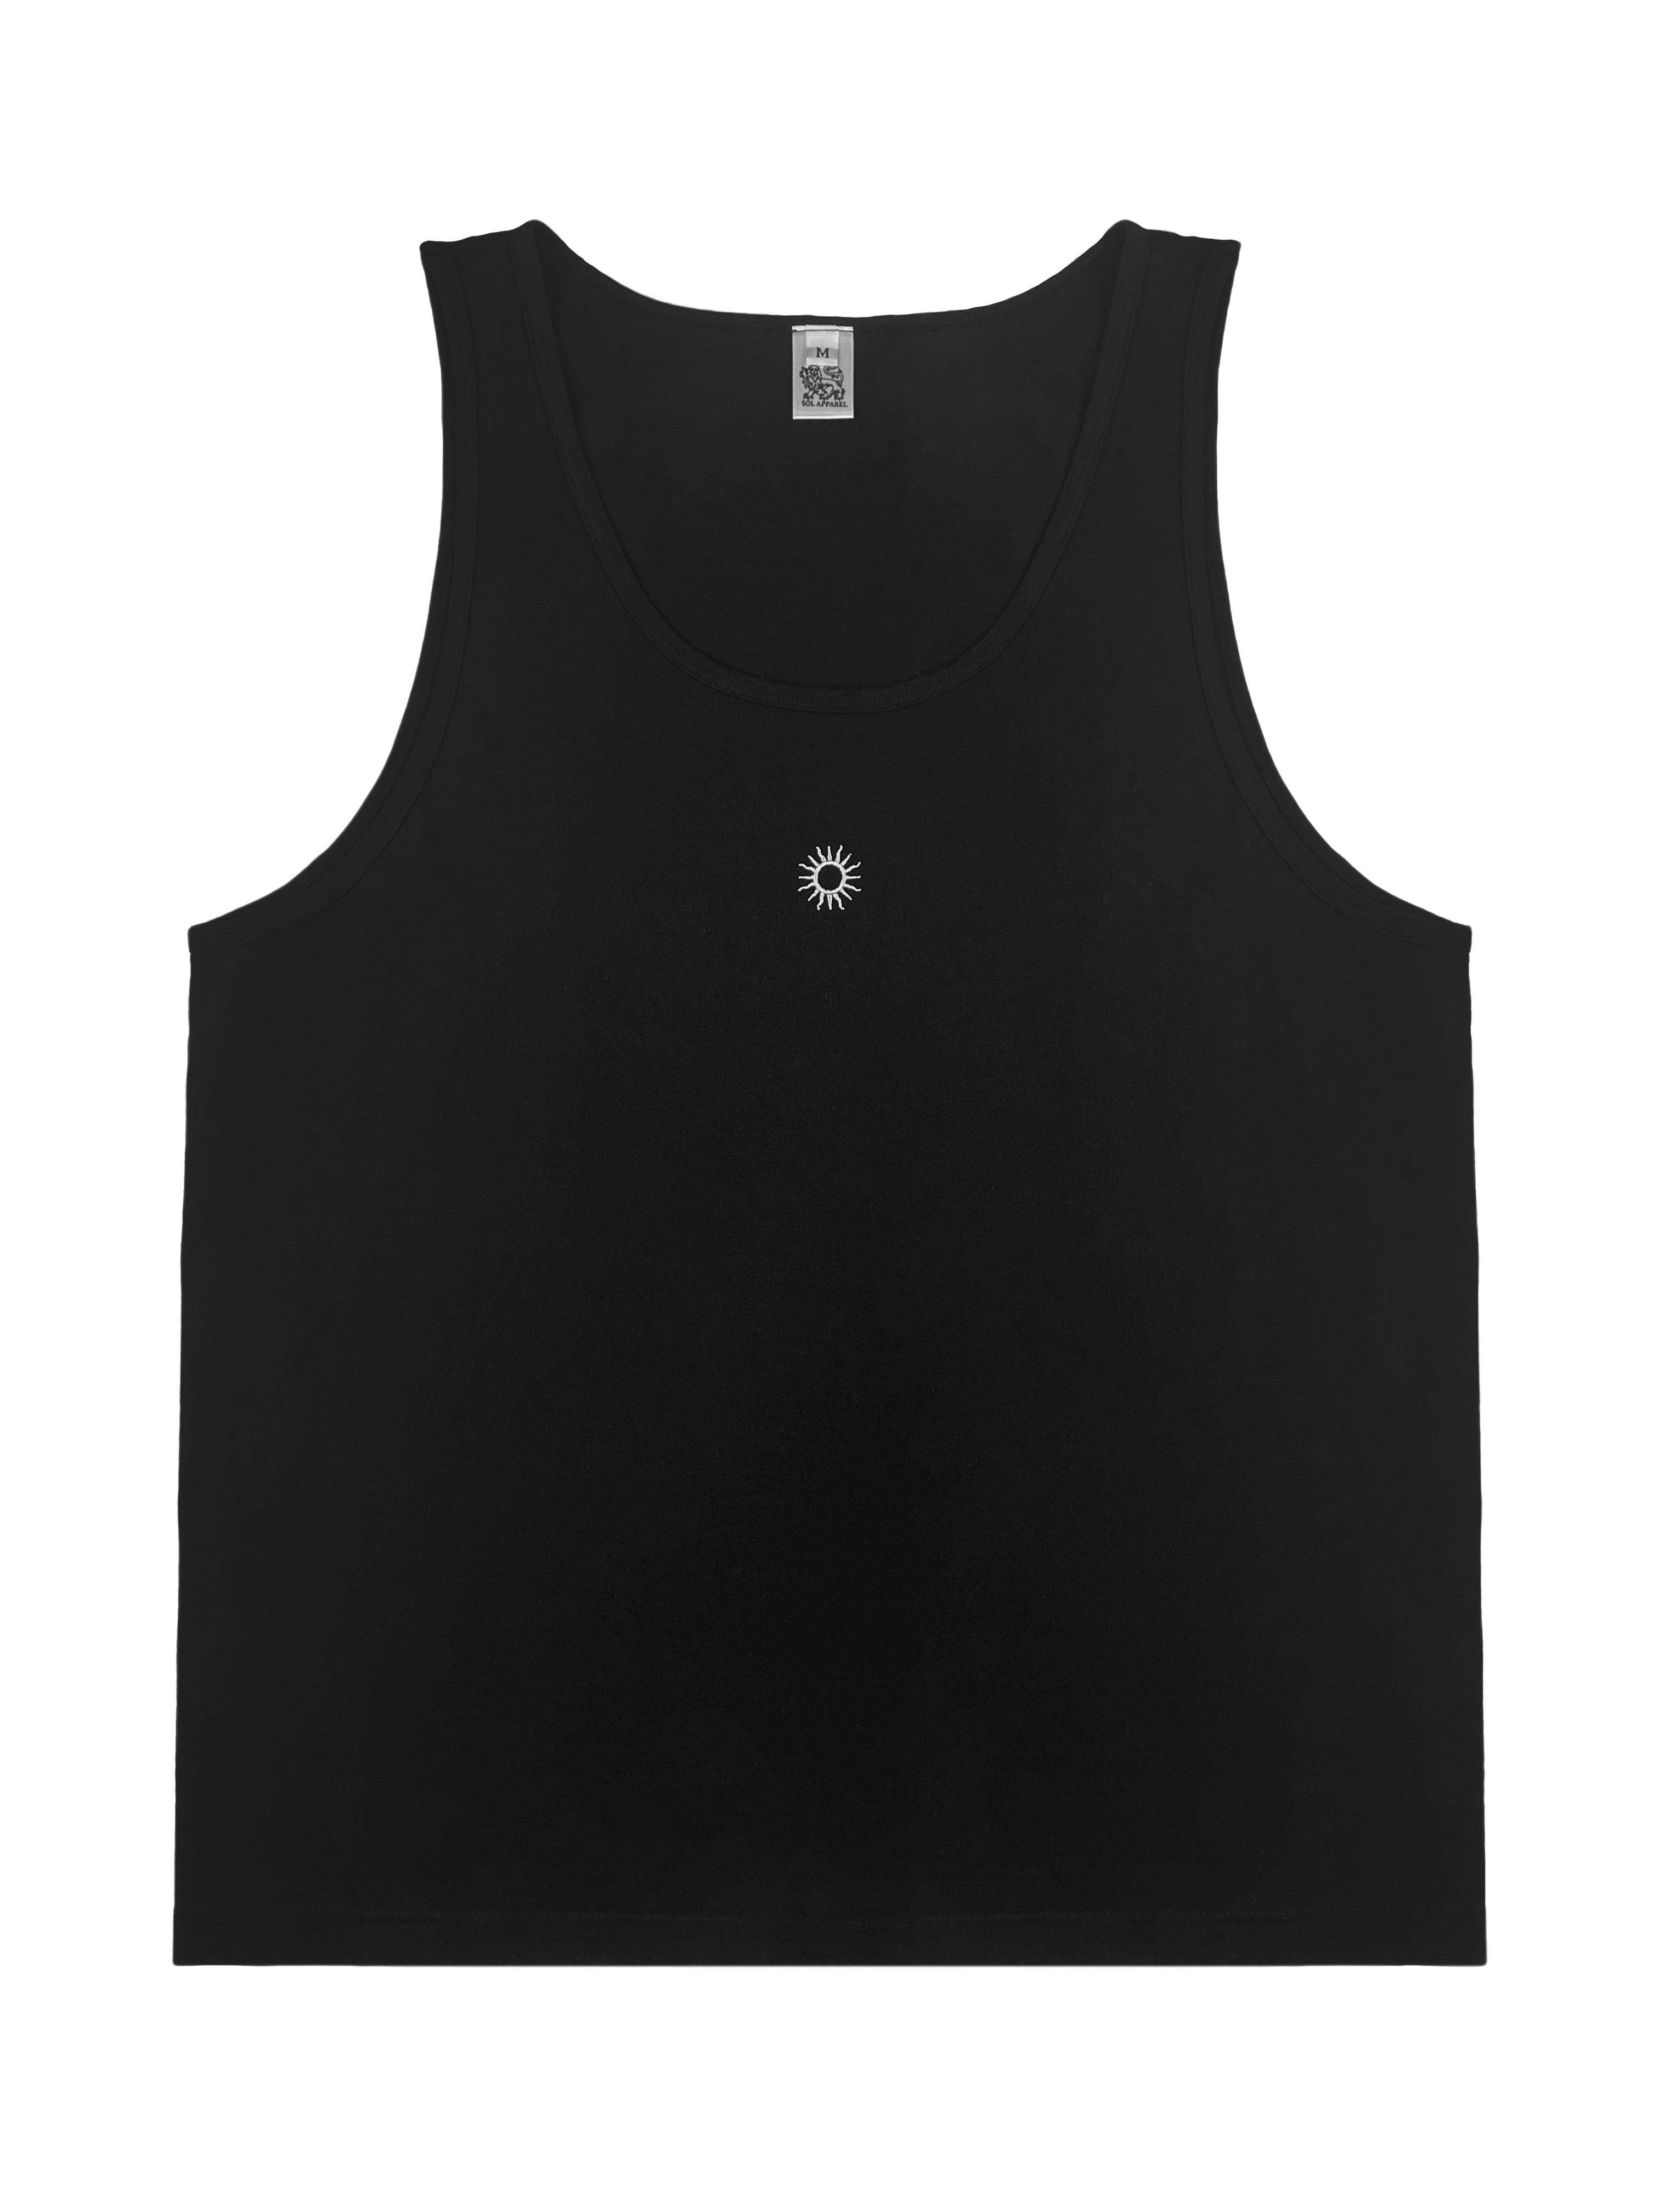 mens 100% cotton gym tank top with white sun logo in the centre